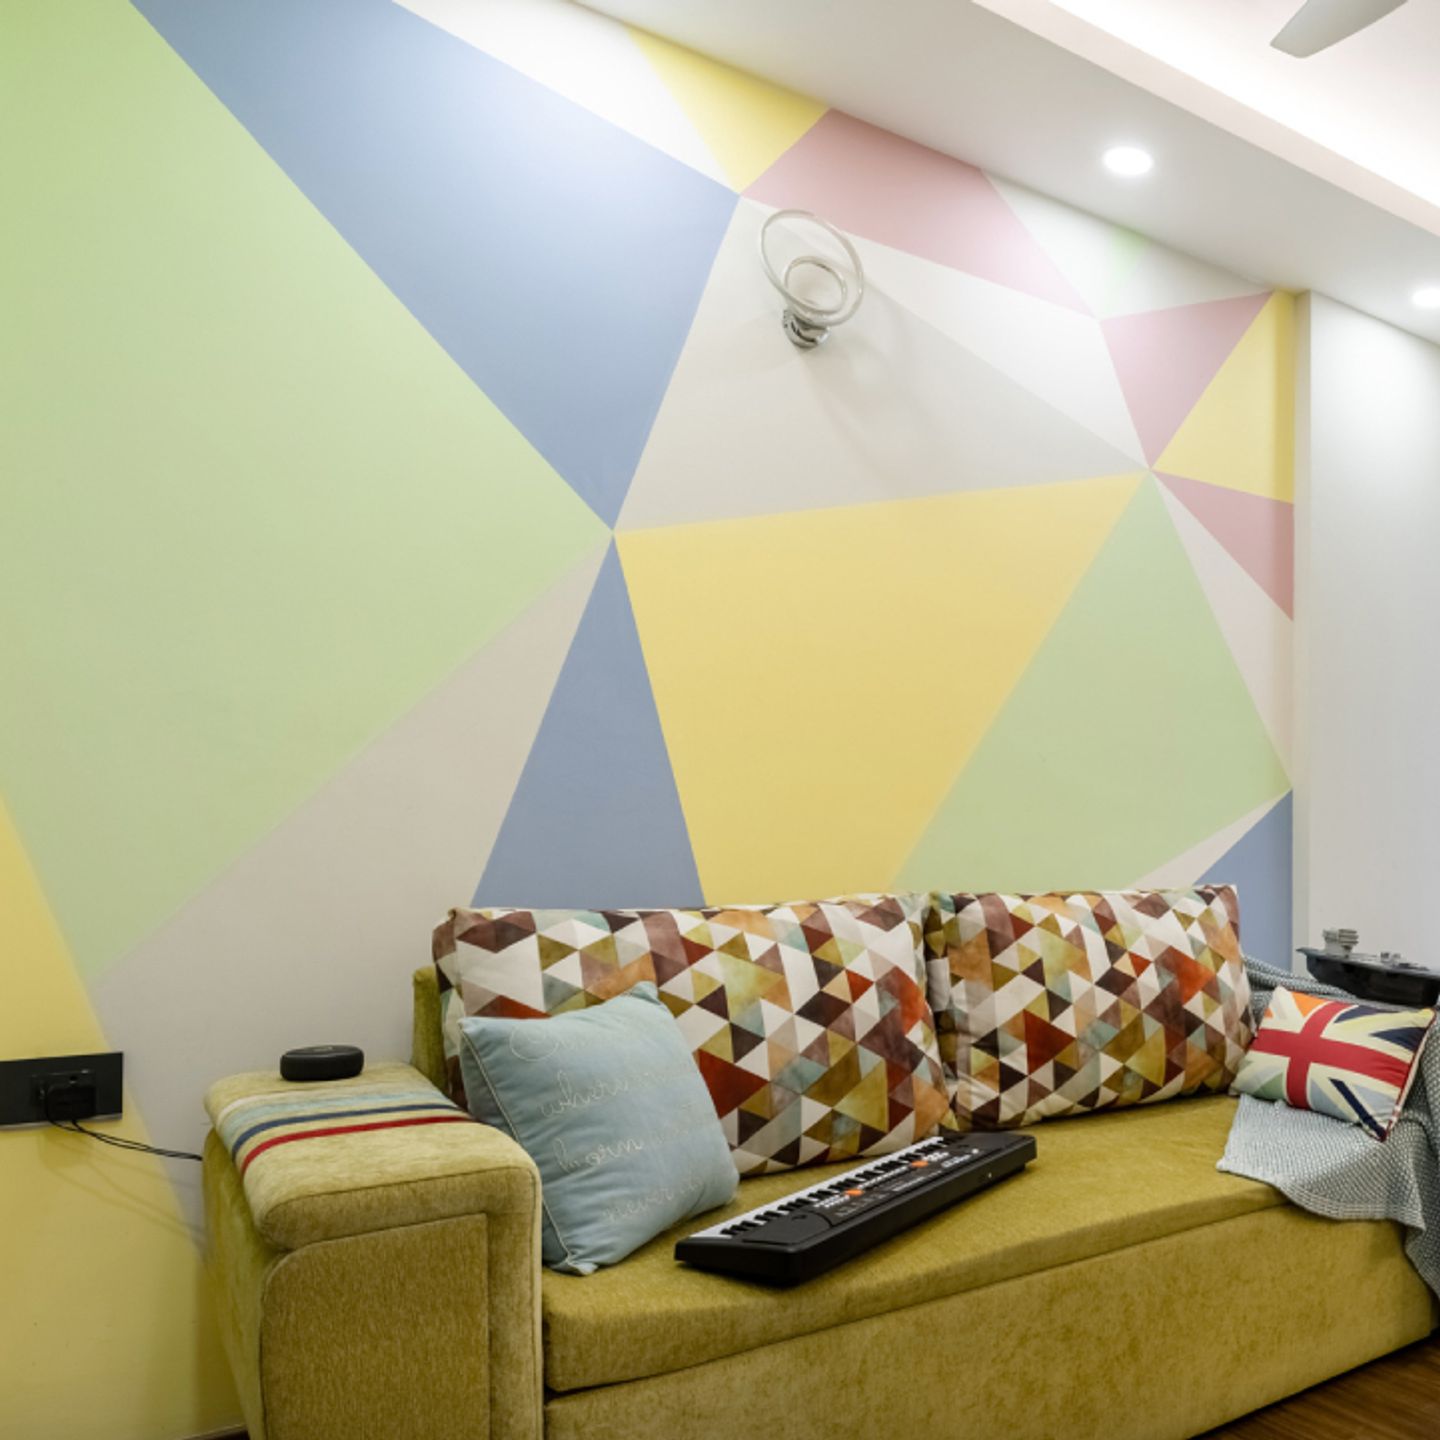 Colourful Wall Paint With A Patterned Design - Livspace